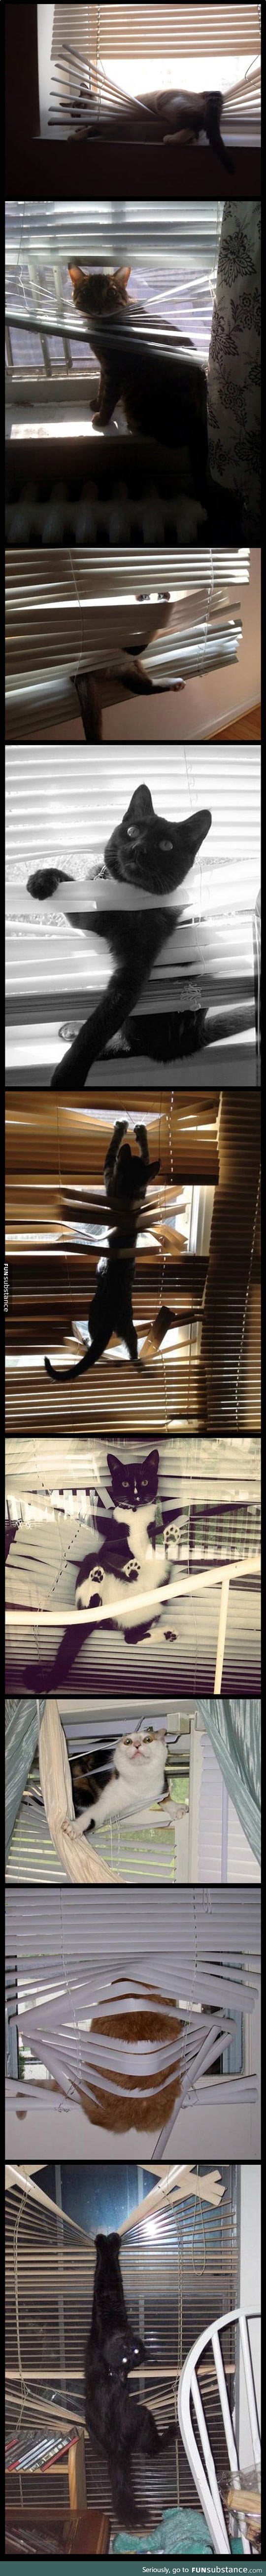 Cats and window blinds are mortal enemies